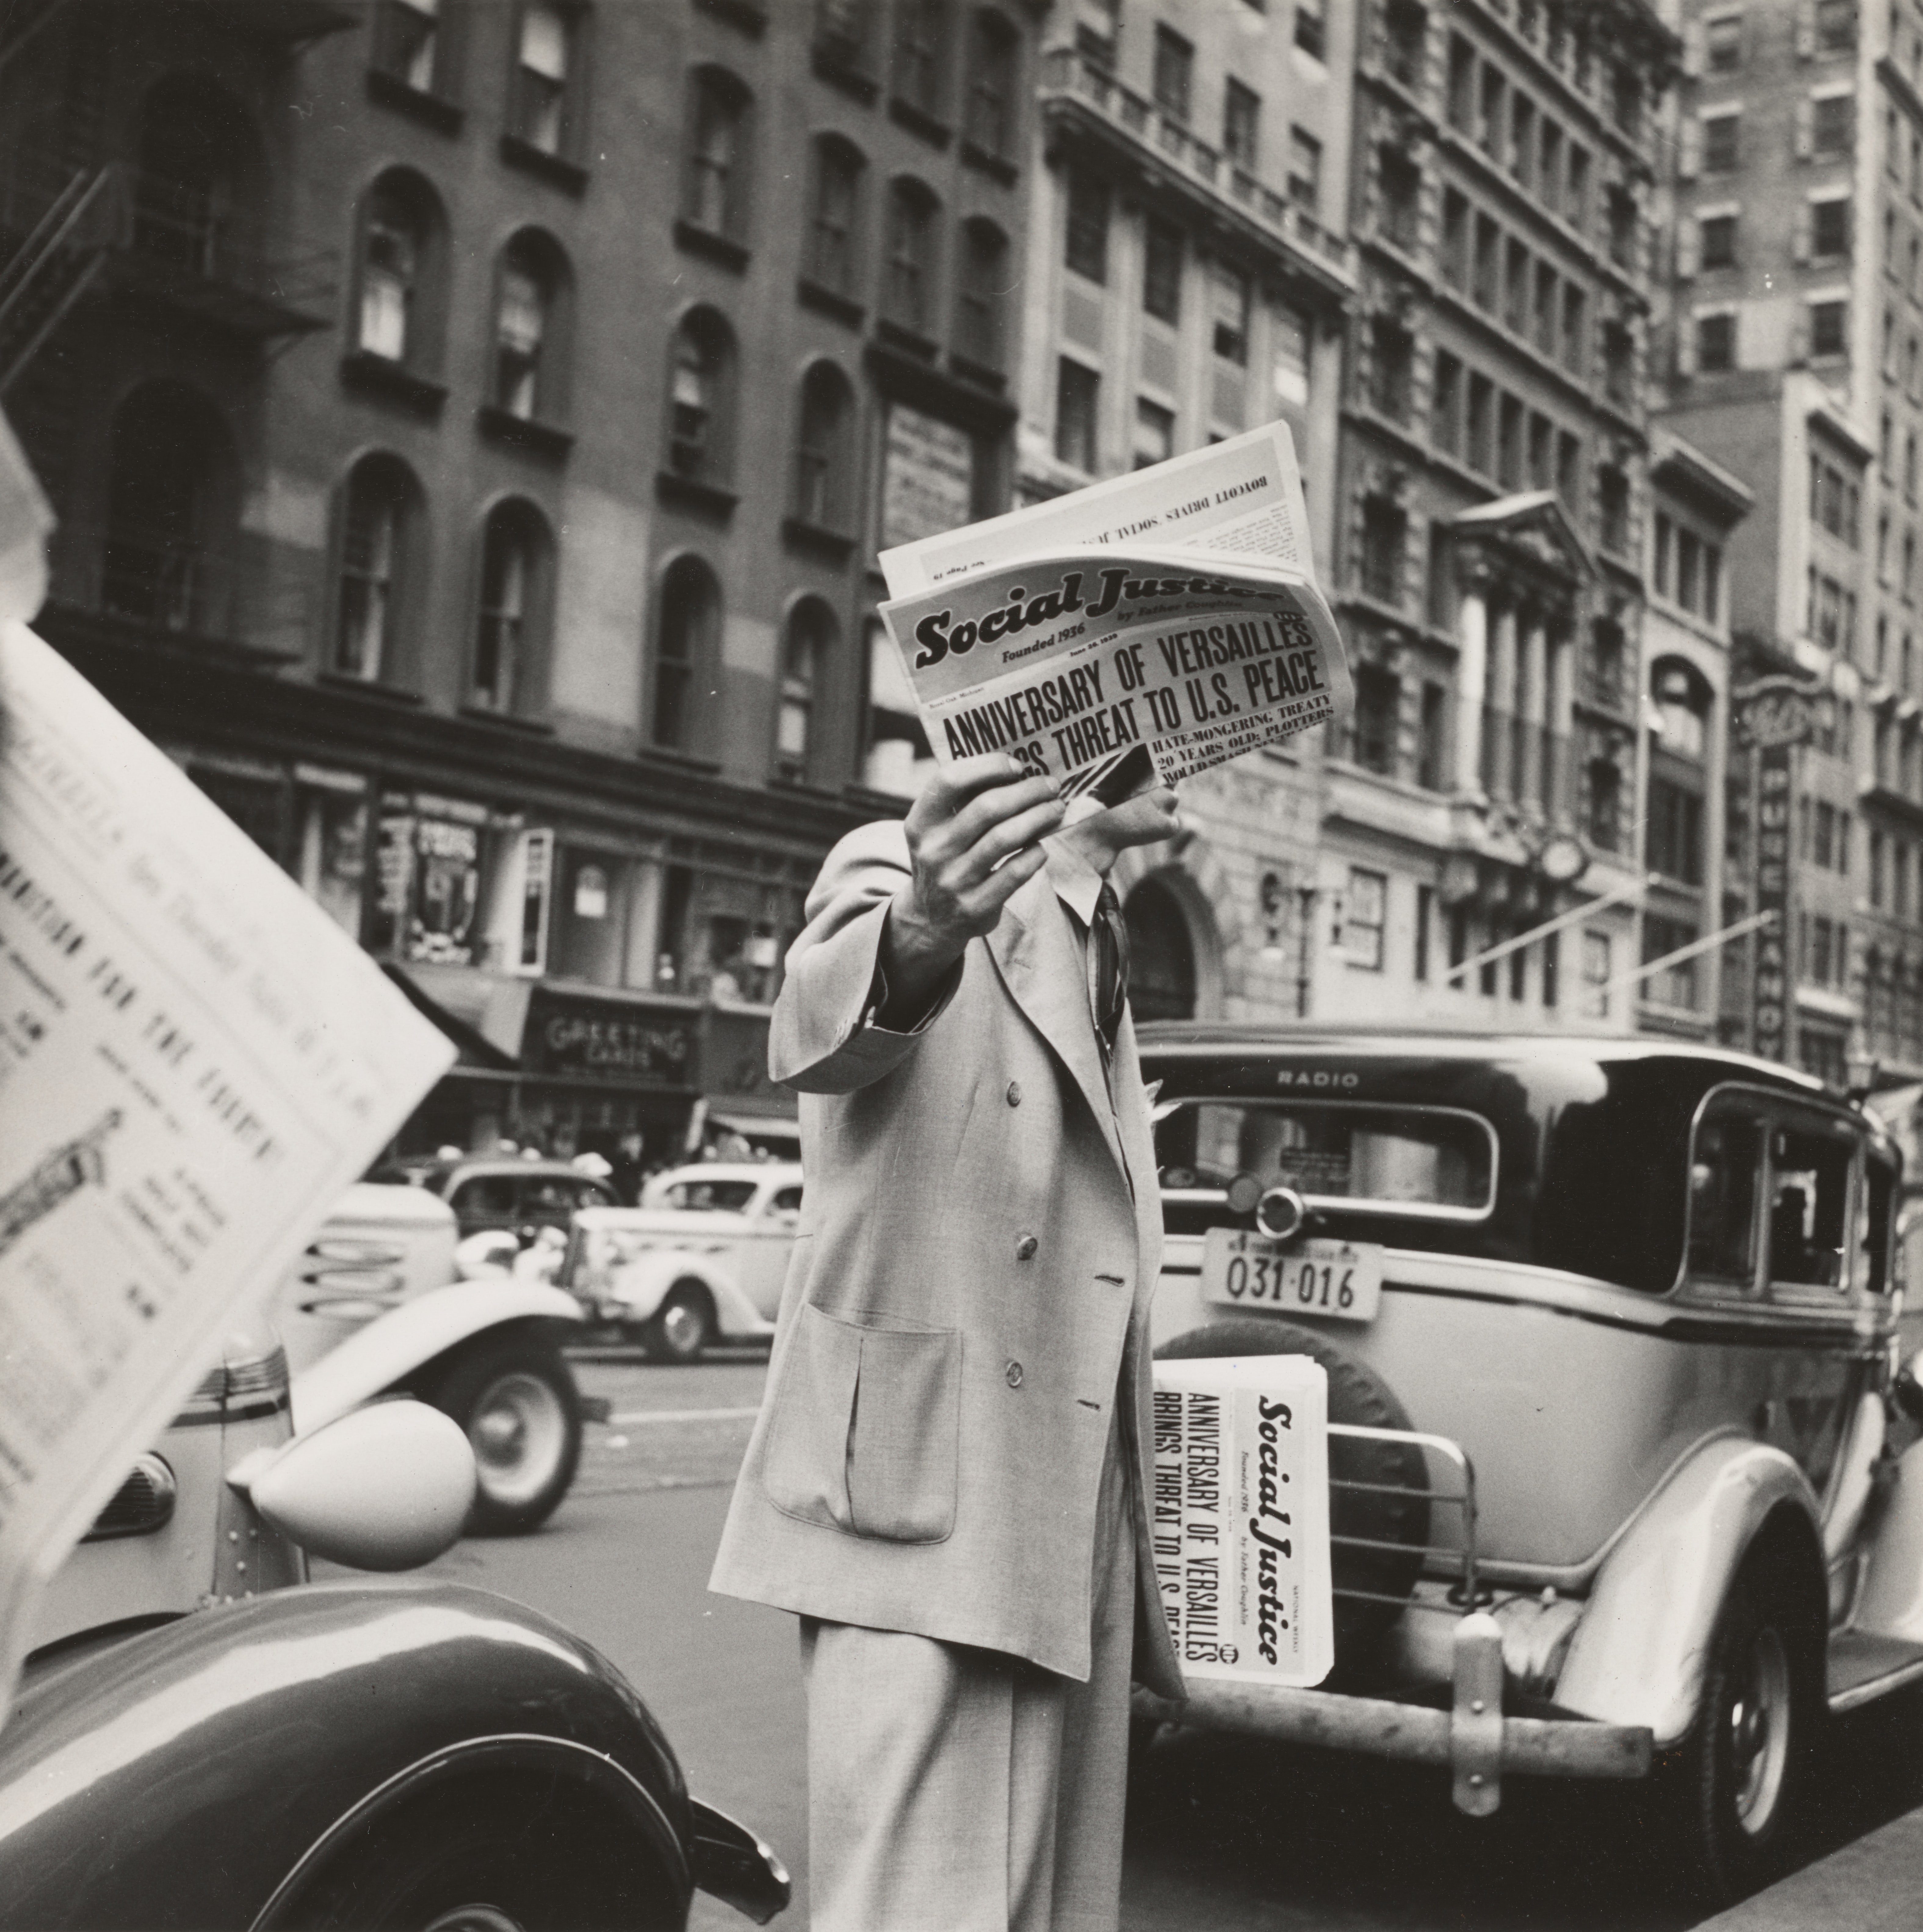 "Social Justice" newspaper sold on a street corner in New York City, in 1939